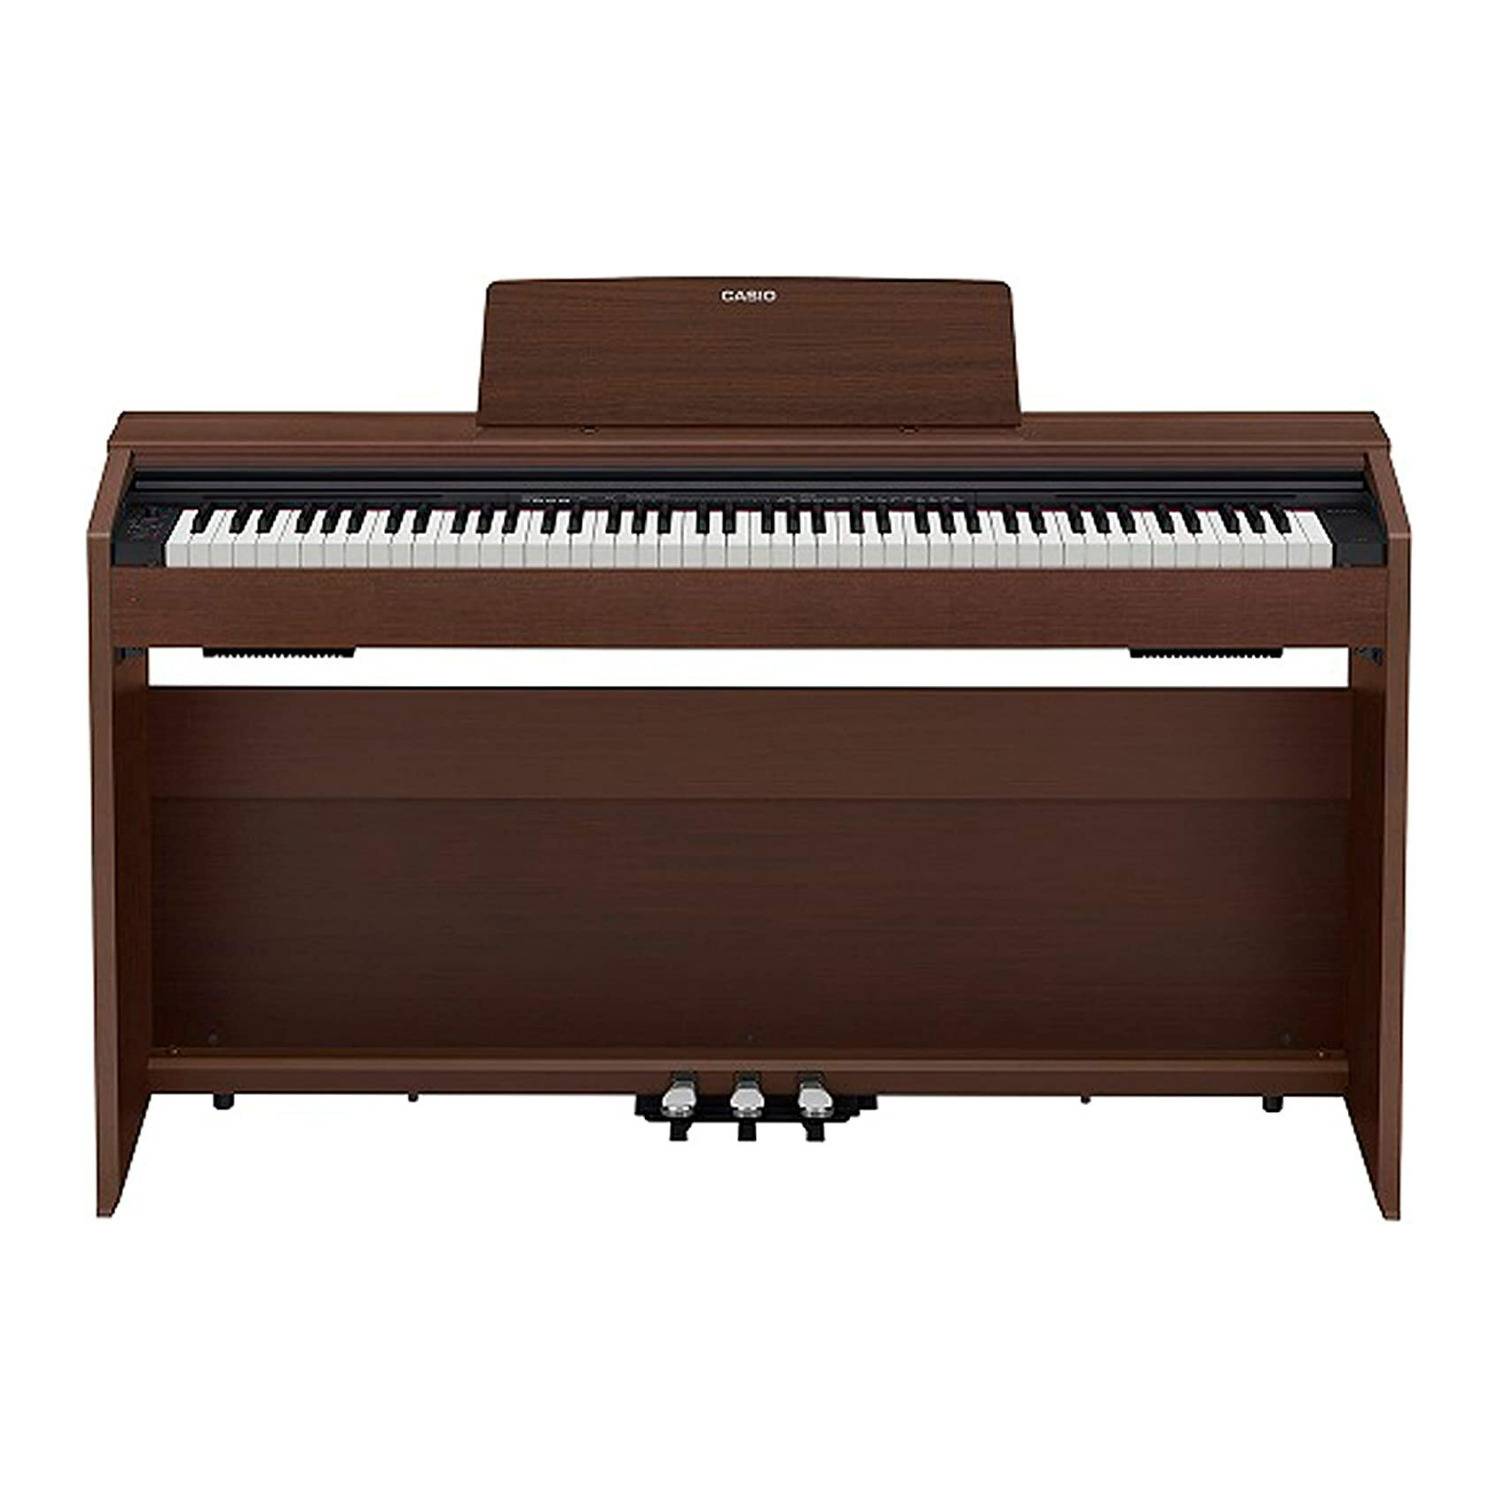 Casio PX-870 BN Privia Digital Home Piano, 256 Notes of Polyphony, 19 Instrument Tones (Brown)